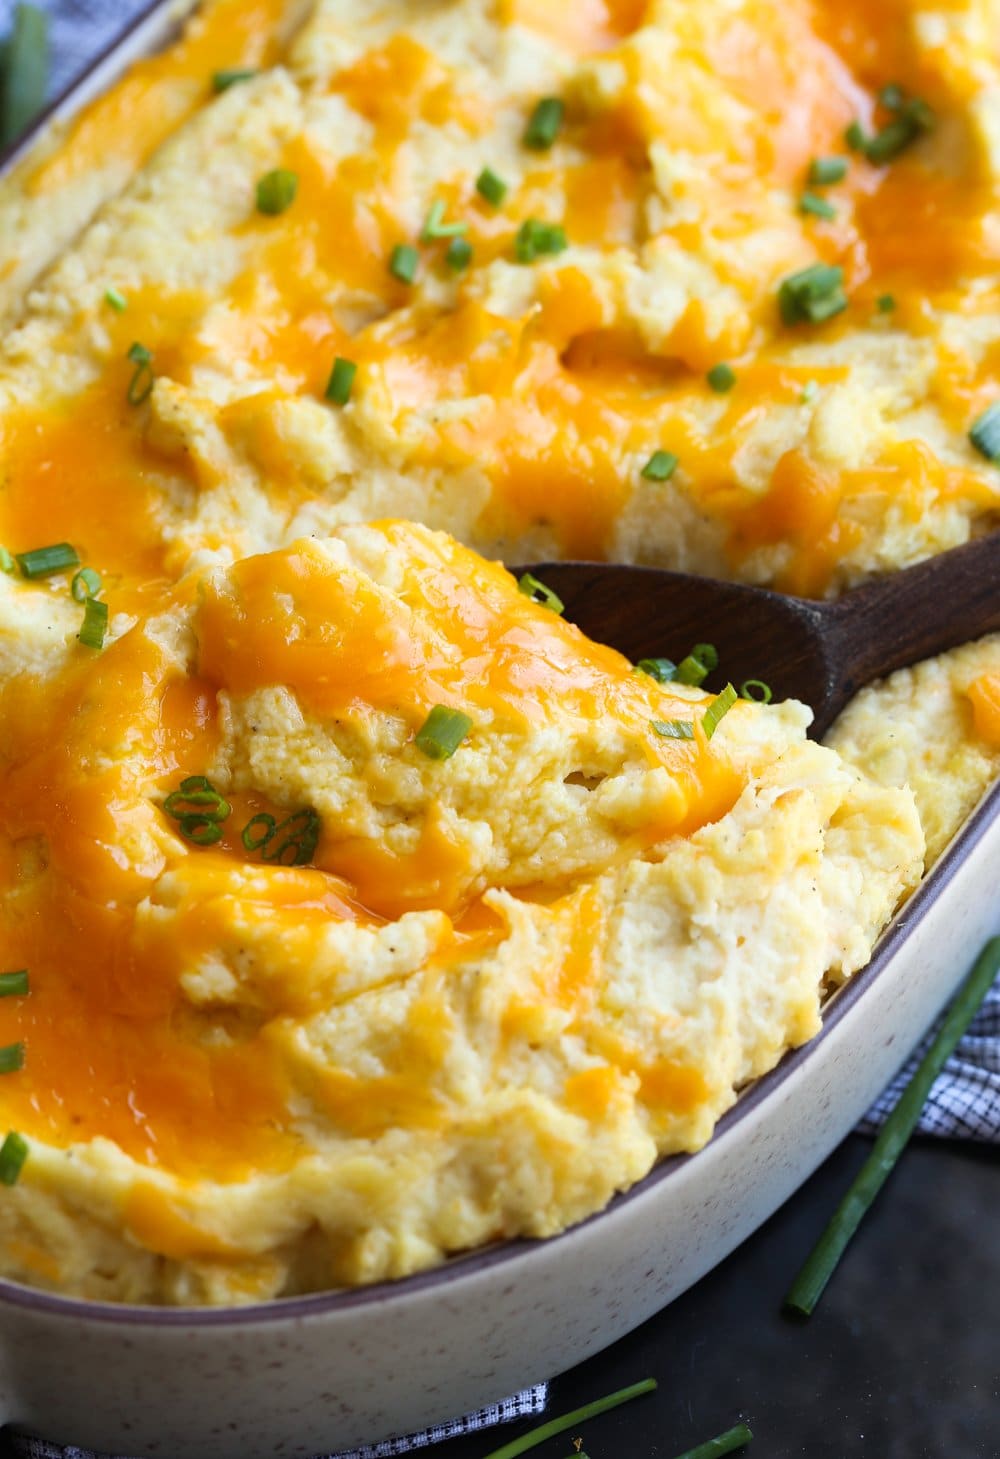 Serving cheesy baked mashed potatoes in a casserole dish